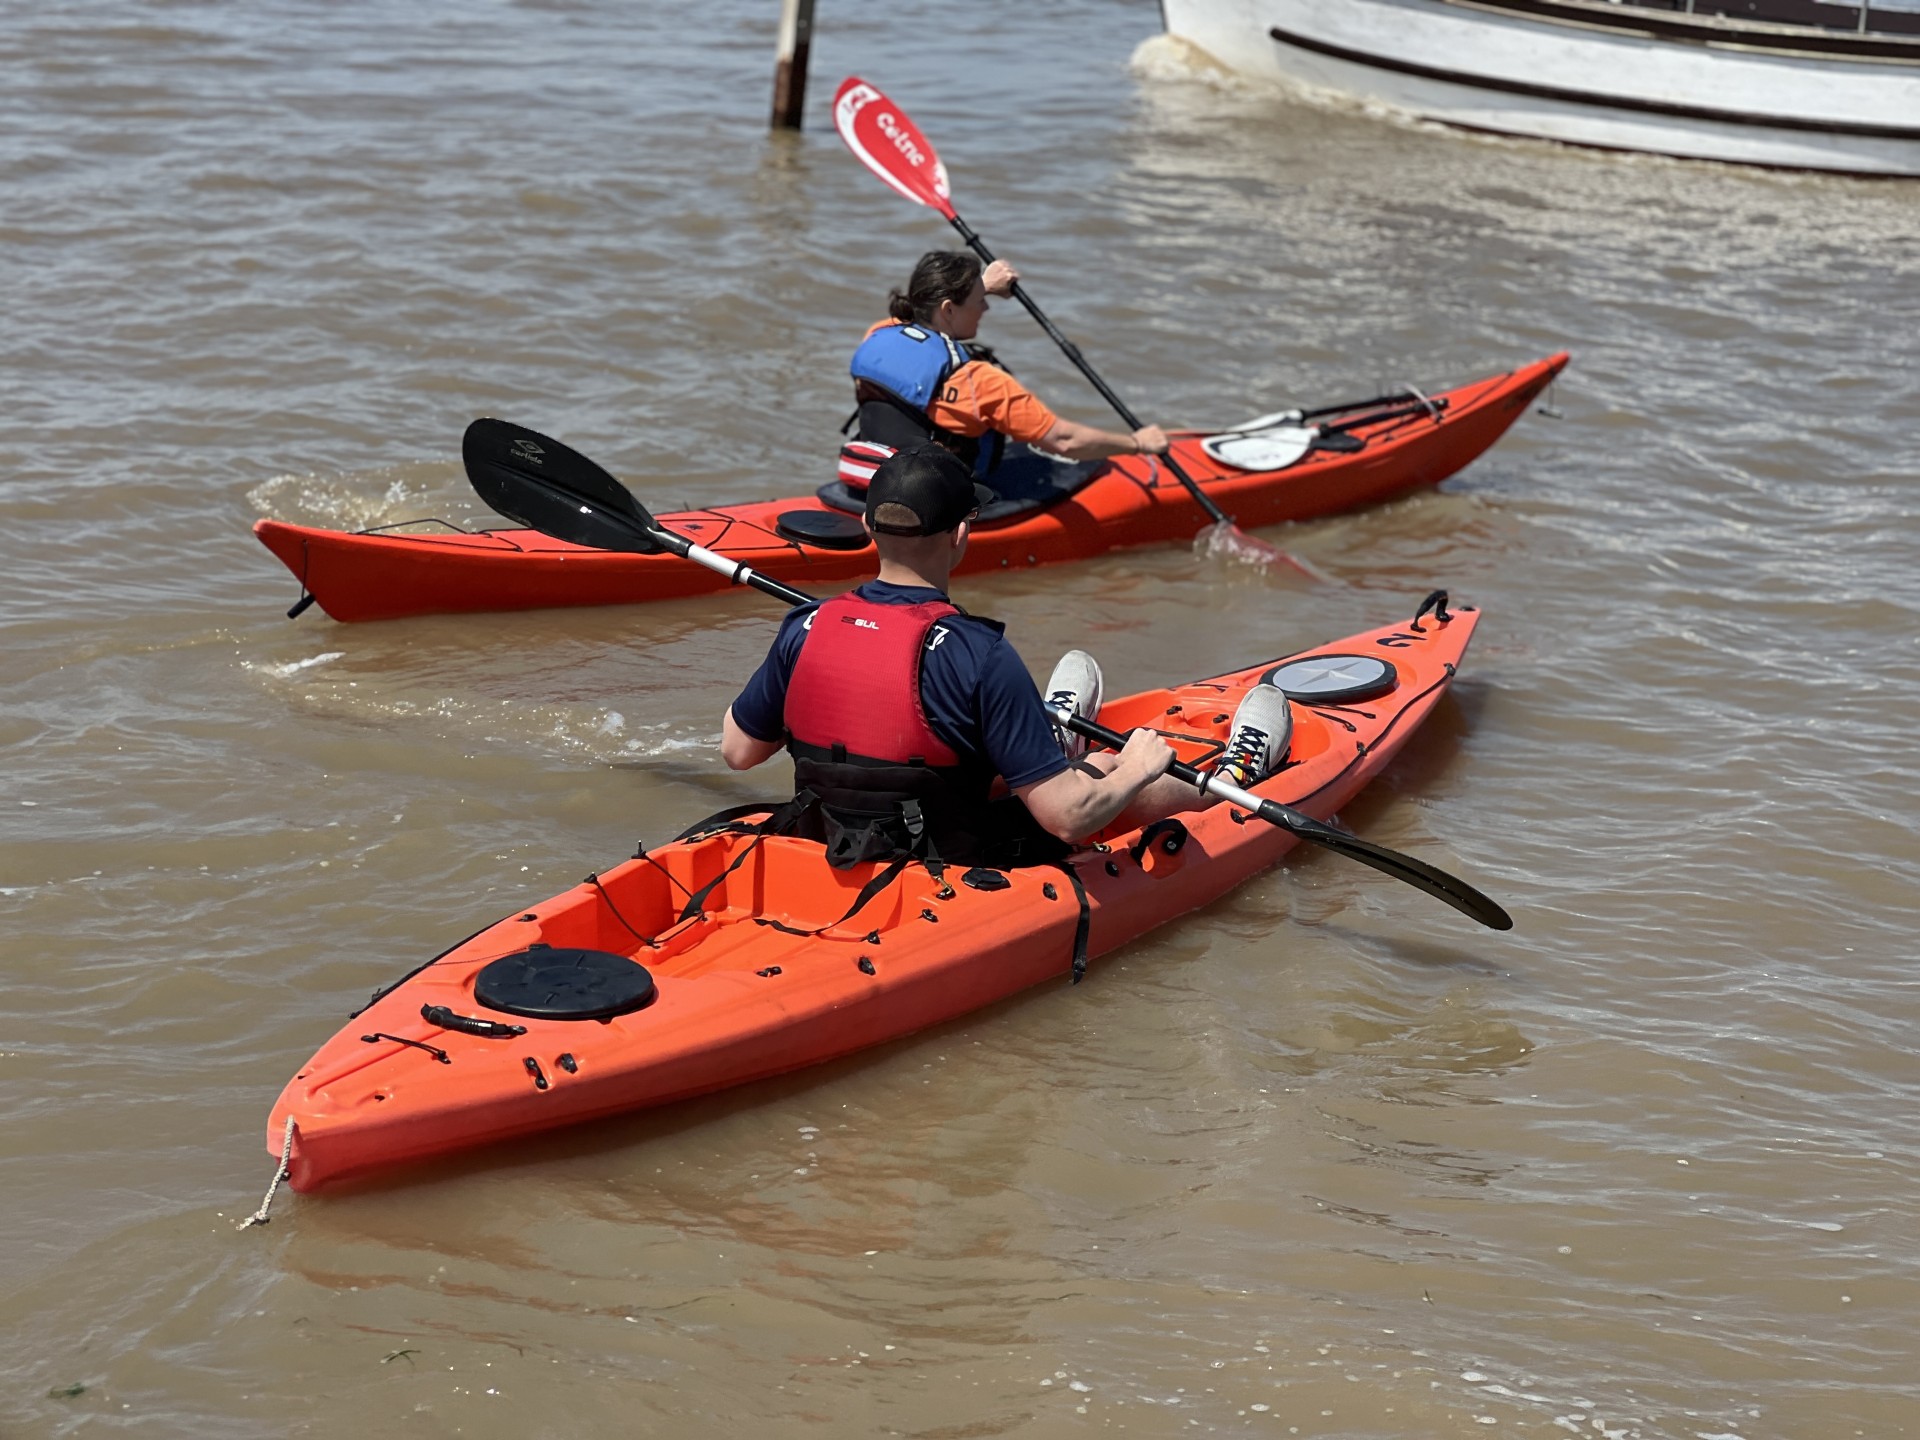 Sea kayak guide with a guest on a sit-on-top kayak in Suffolk.